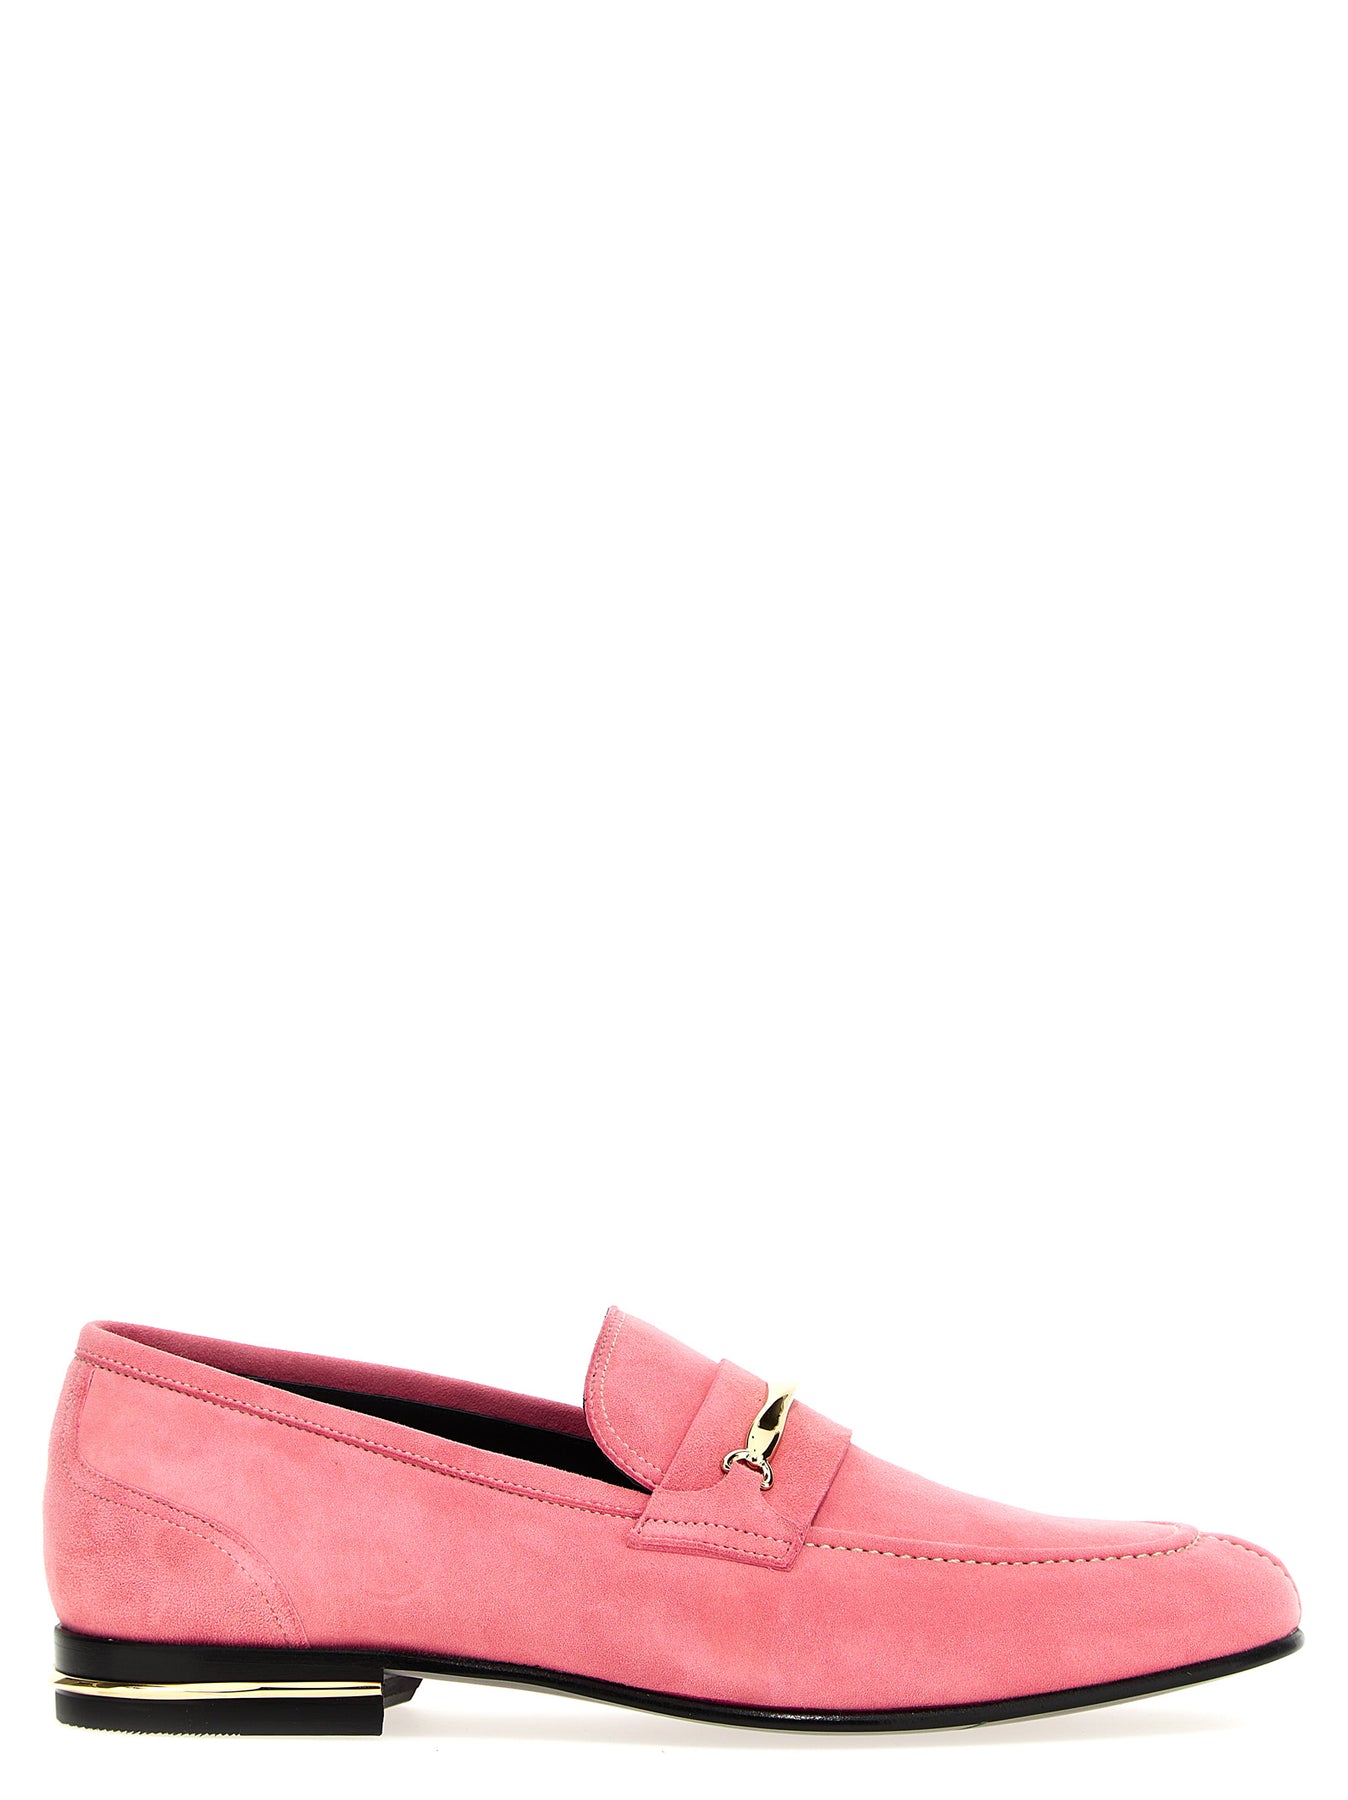 Bally Logo Suede Loafers In Pink | ModeSens